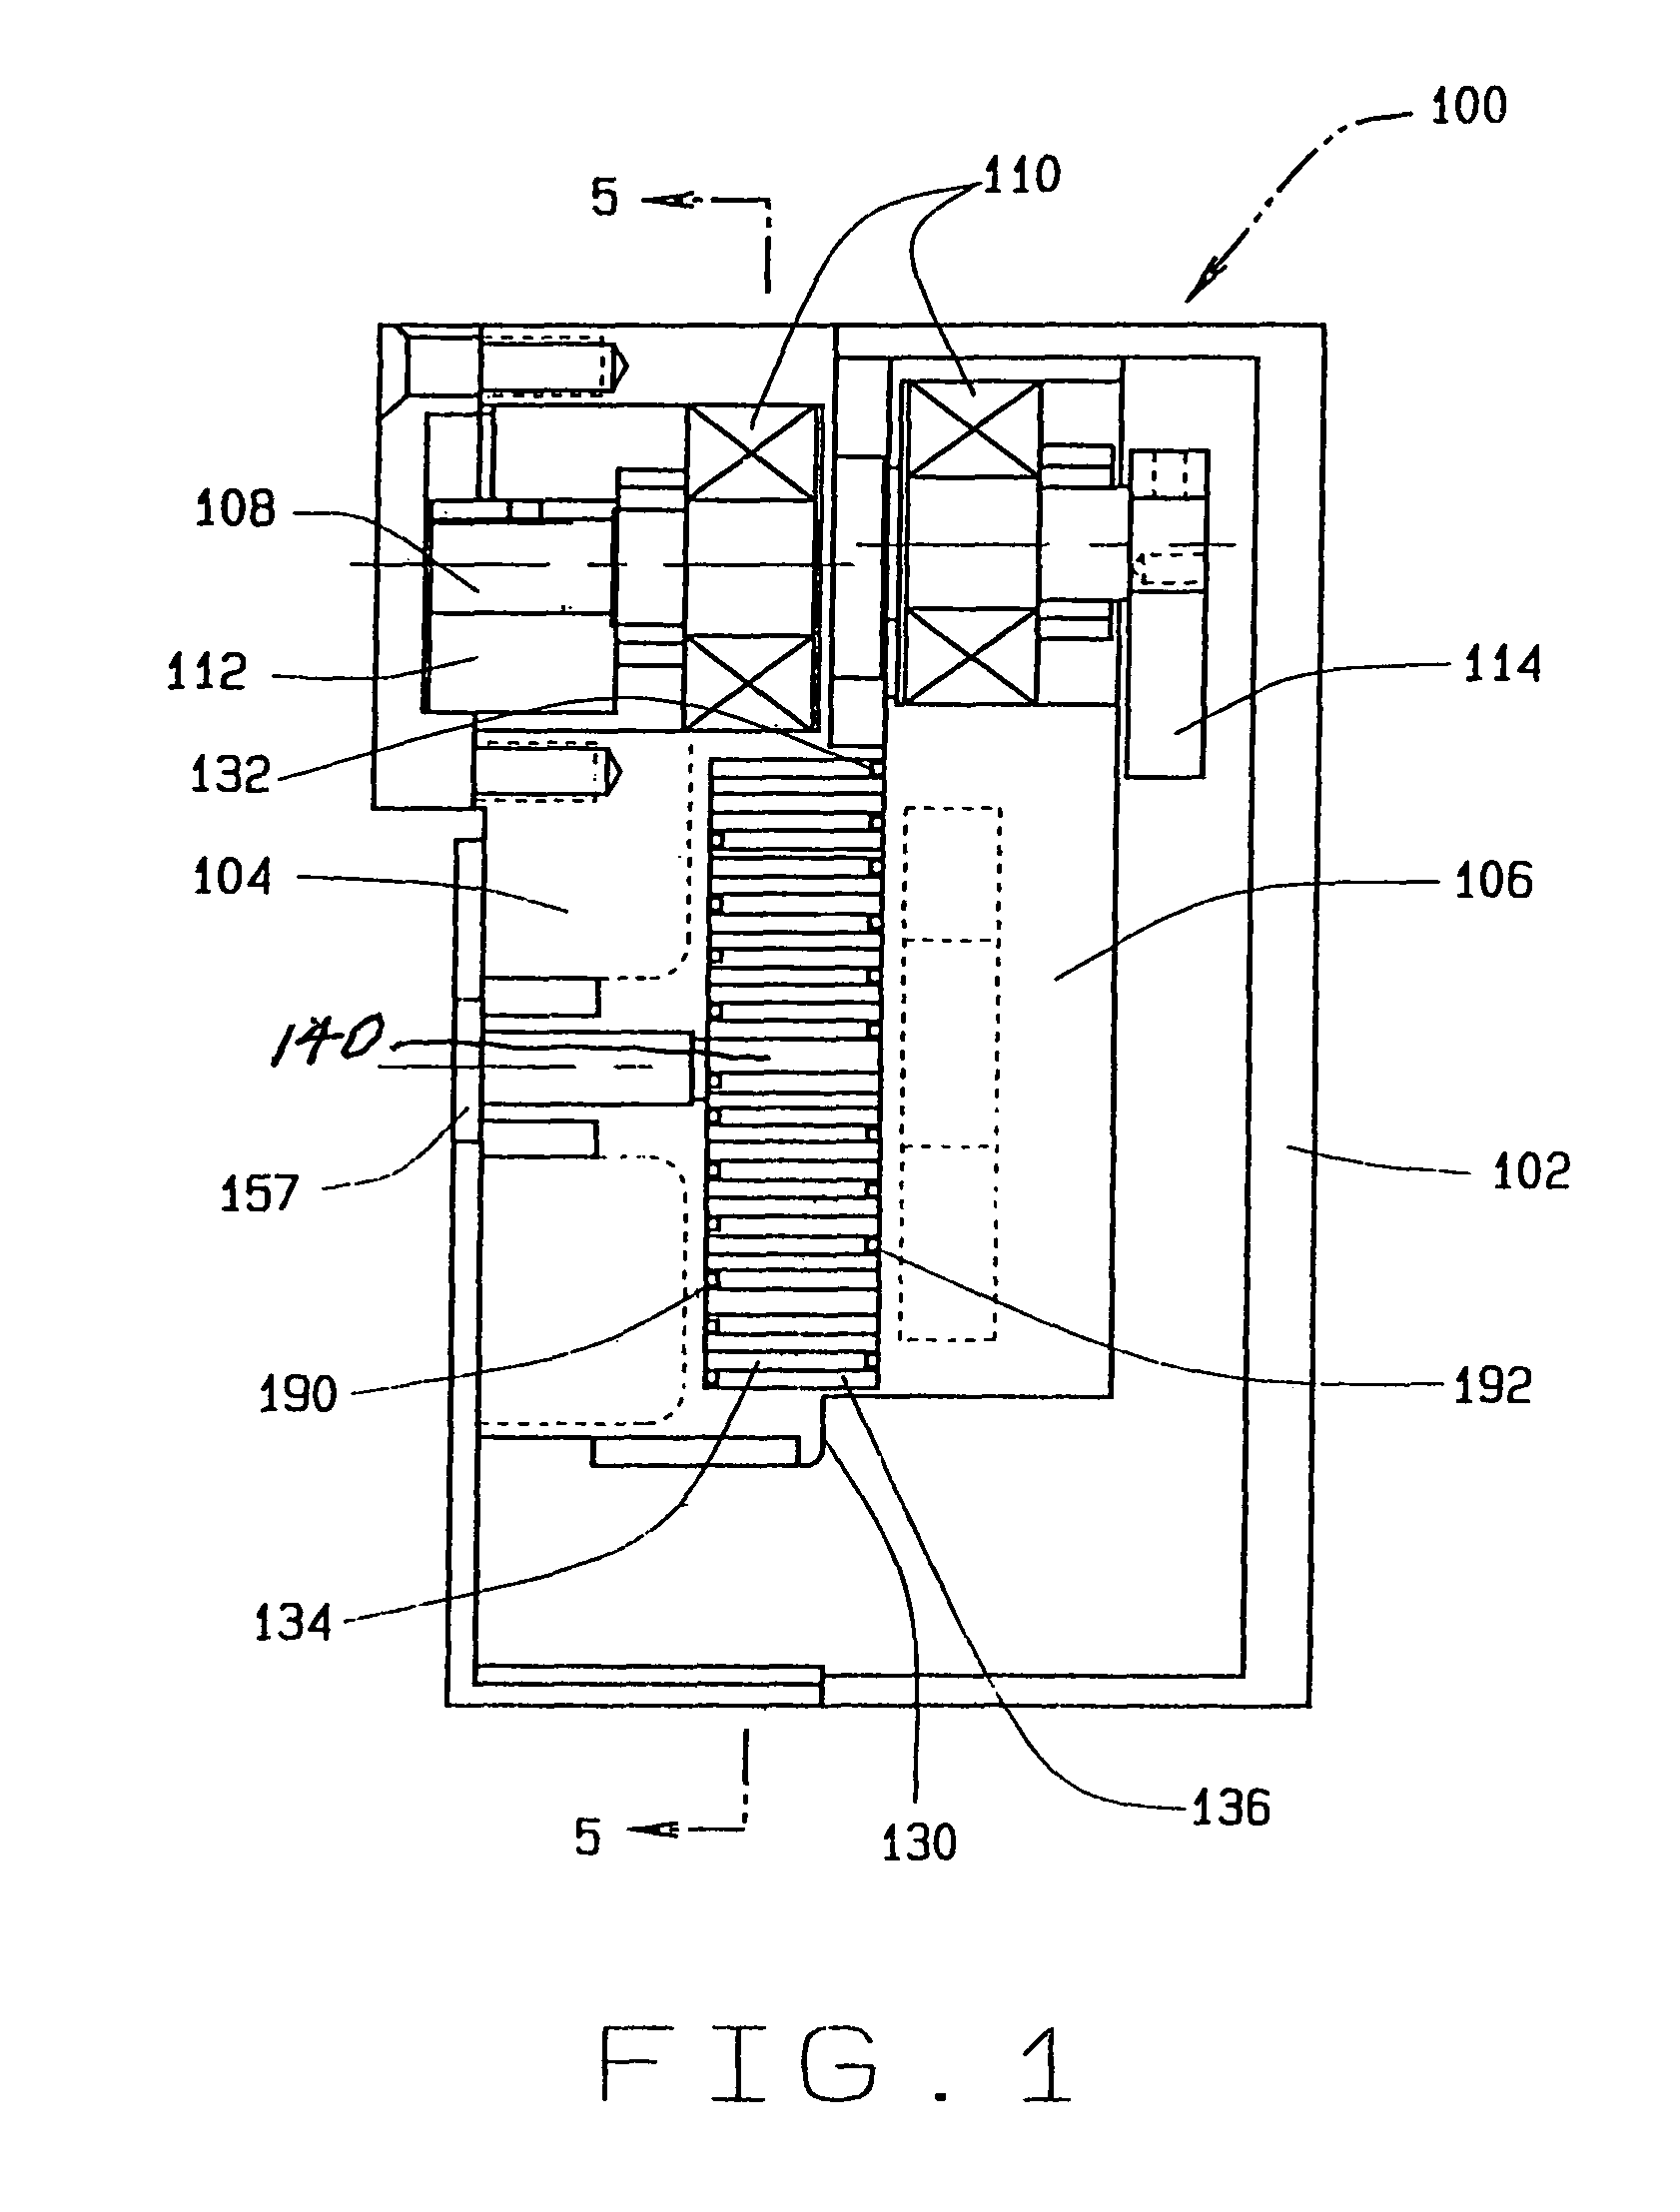 Scroll type device including compressor and expander functions in a single scroll plate pair